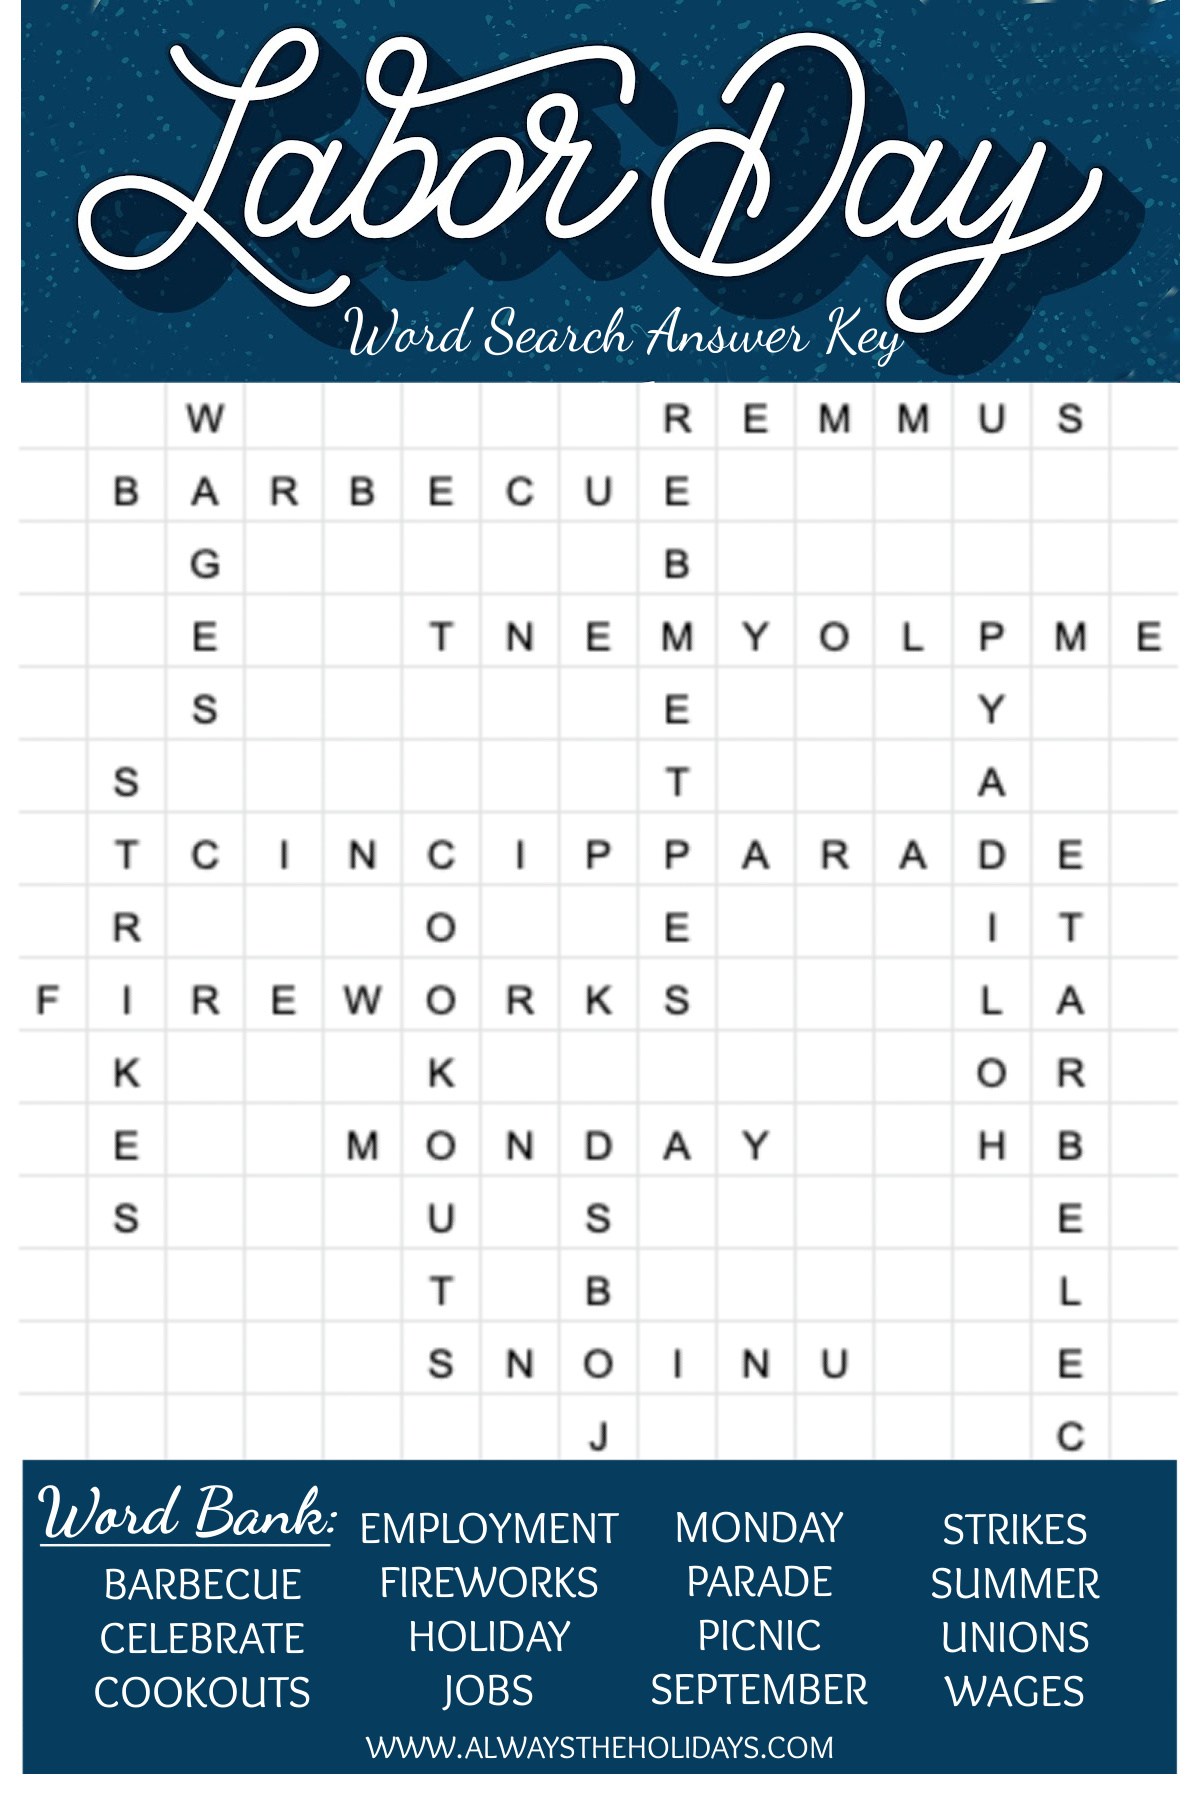 26-free-printable-word-search-puzzles-reader-s-digest-word-search